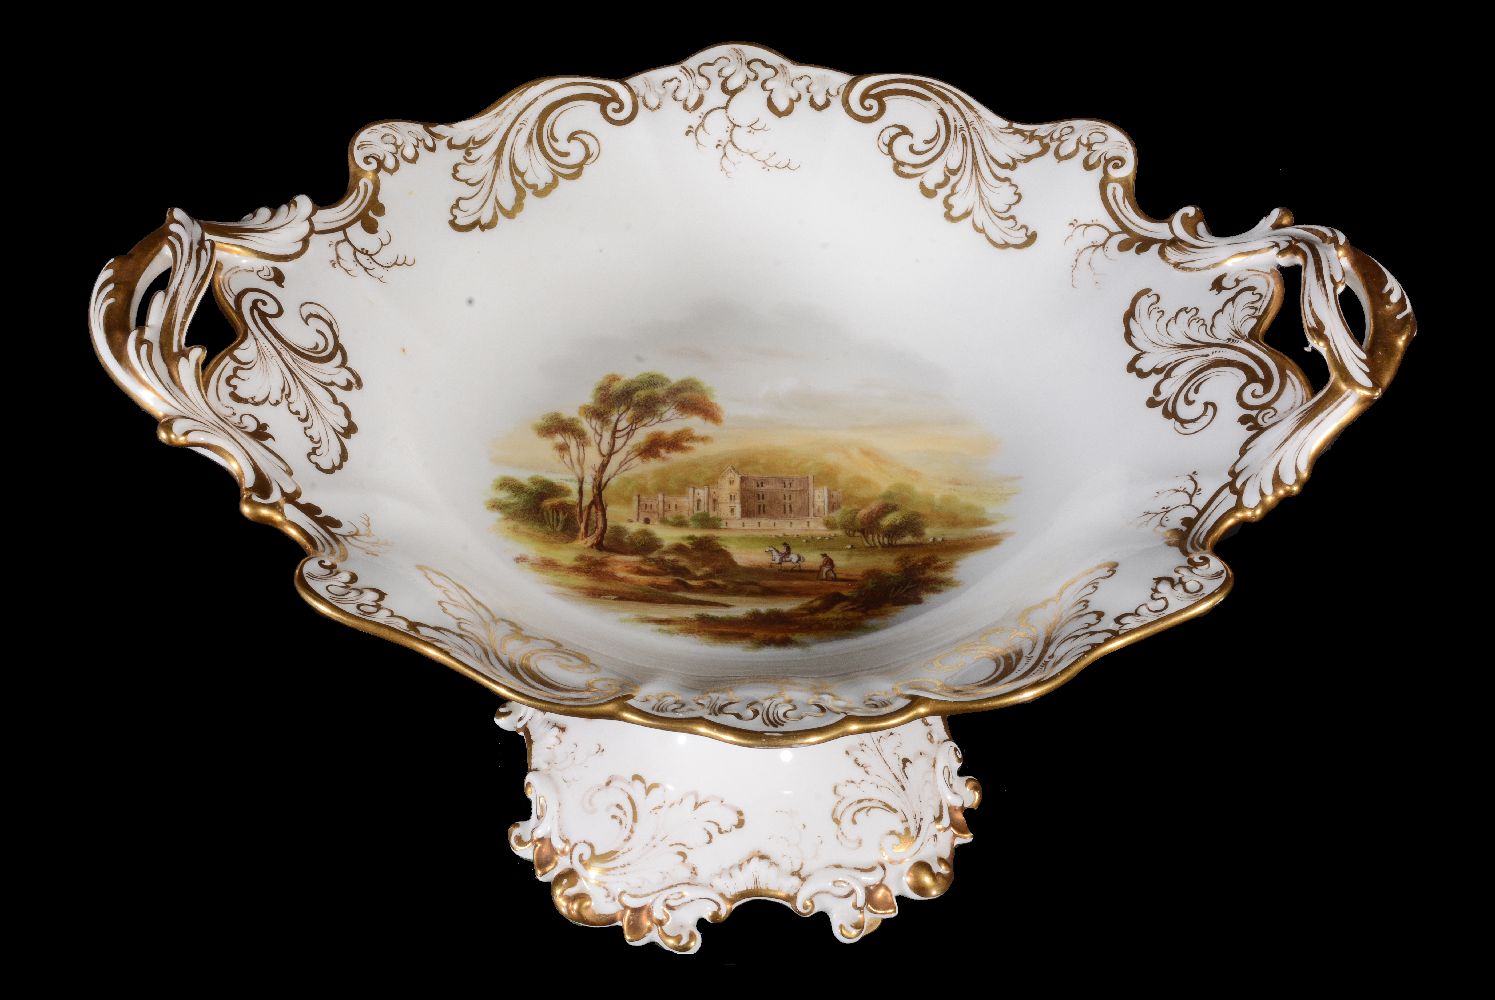 A Ridgway porcelain rococo revival part dessert service, mid 19th century, painted with landscape - Image 7 of 20